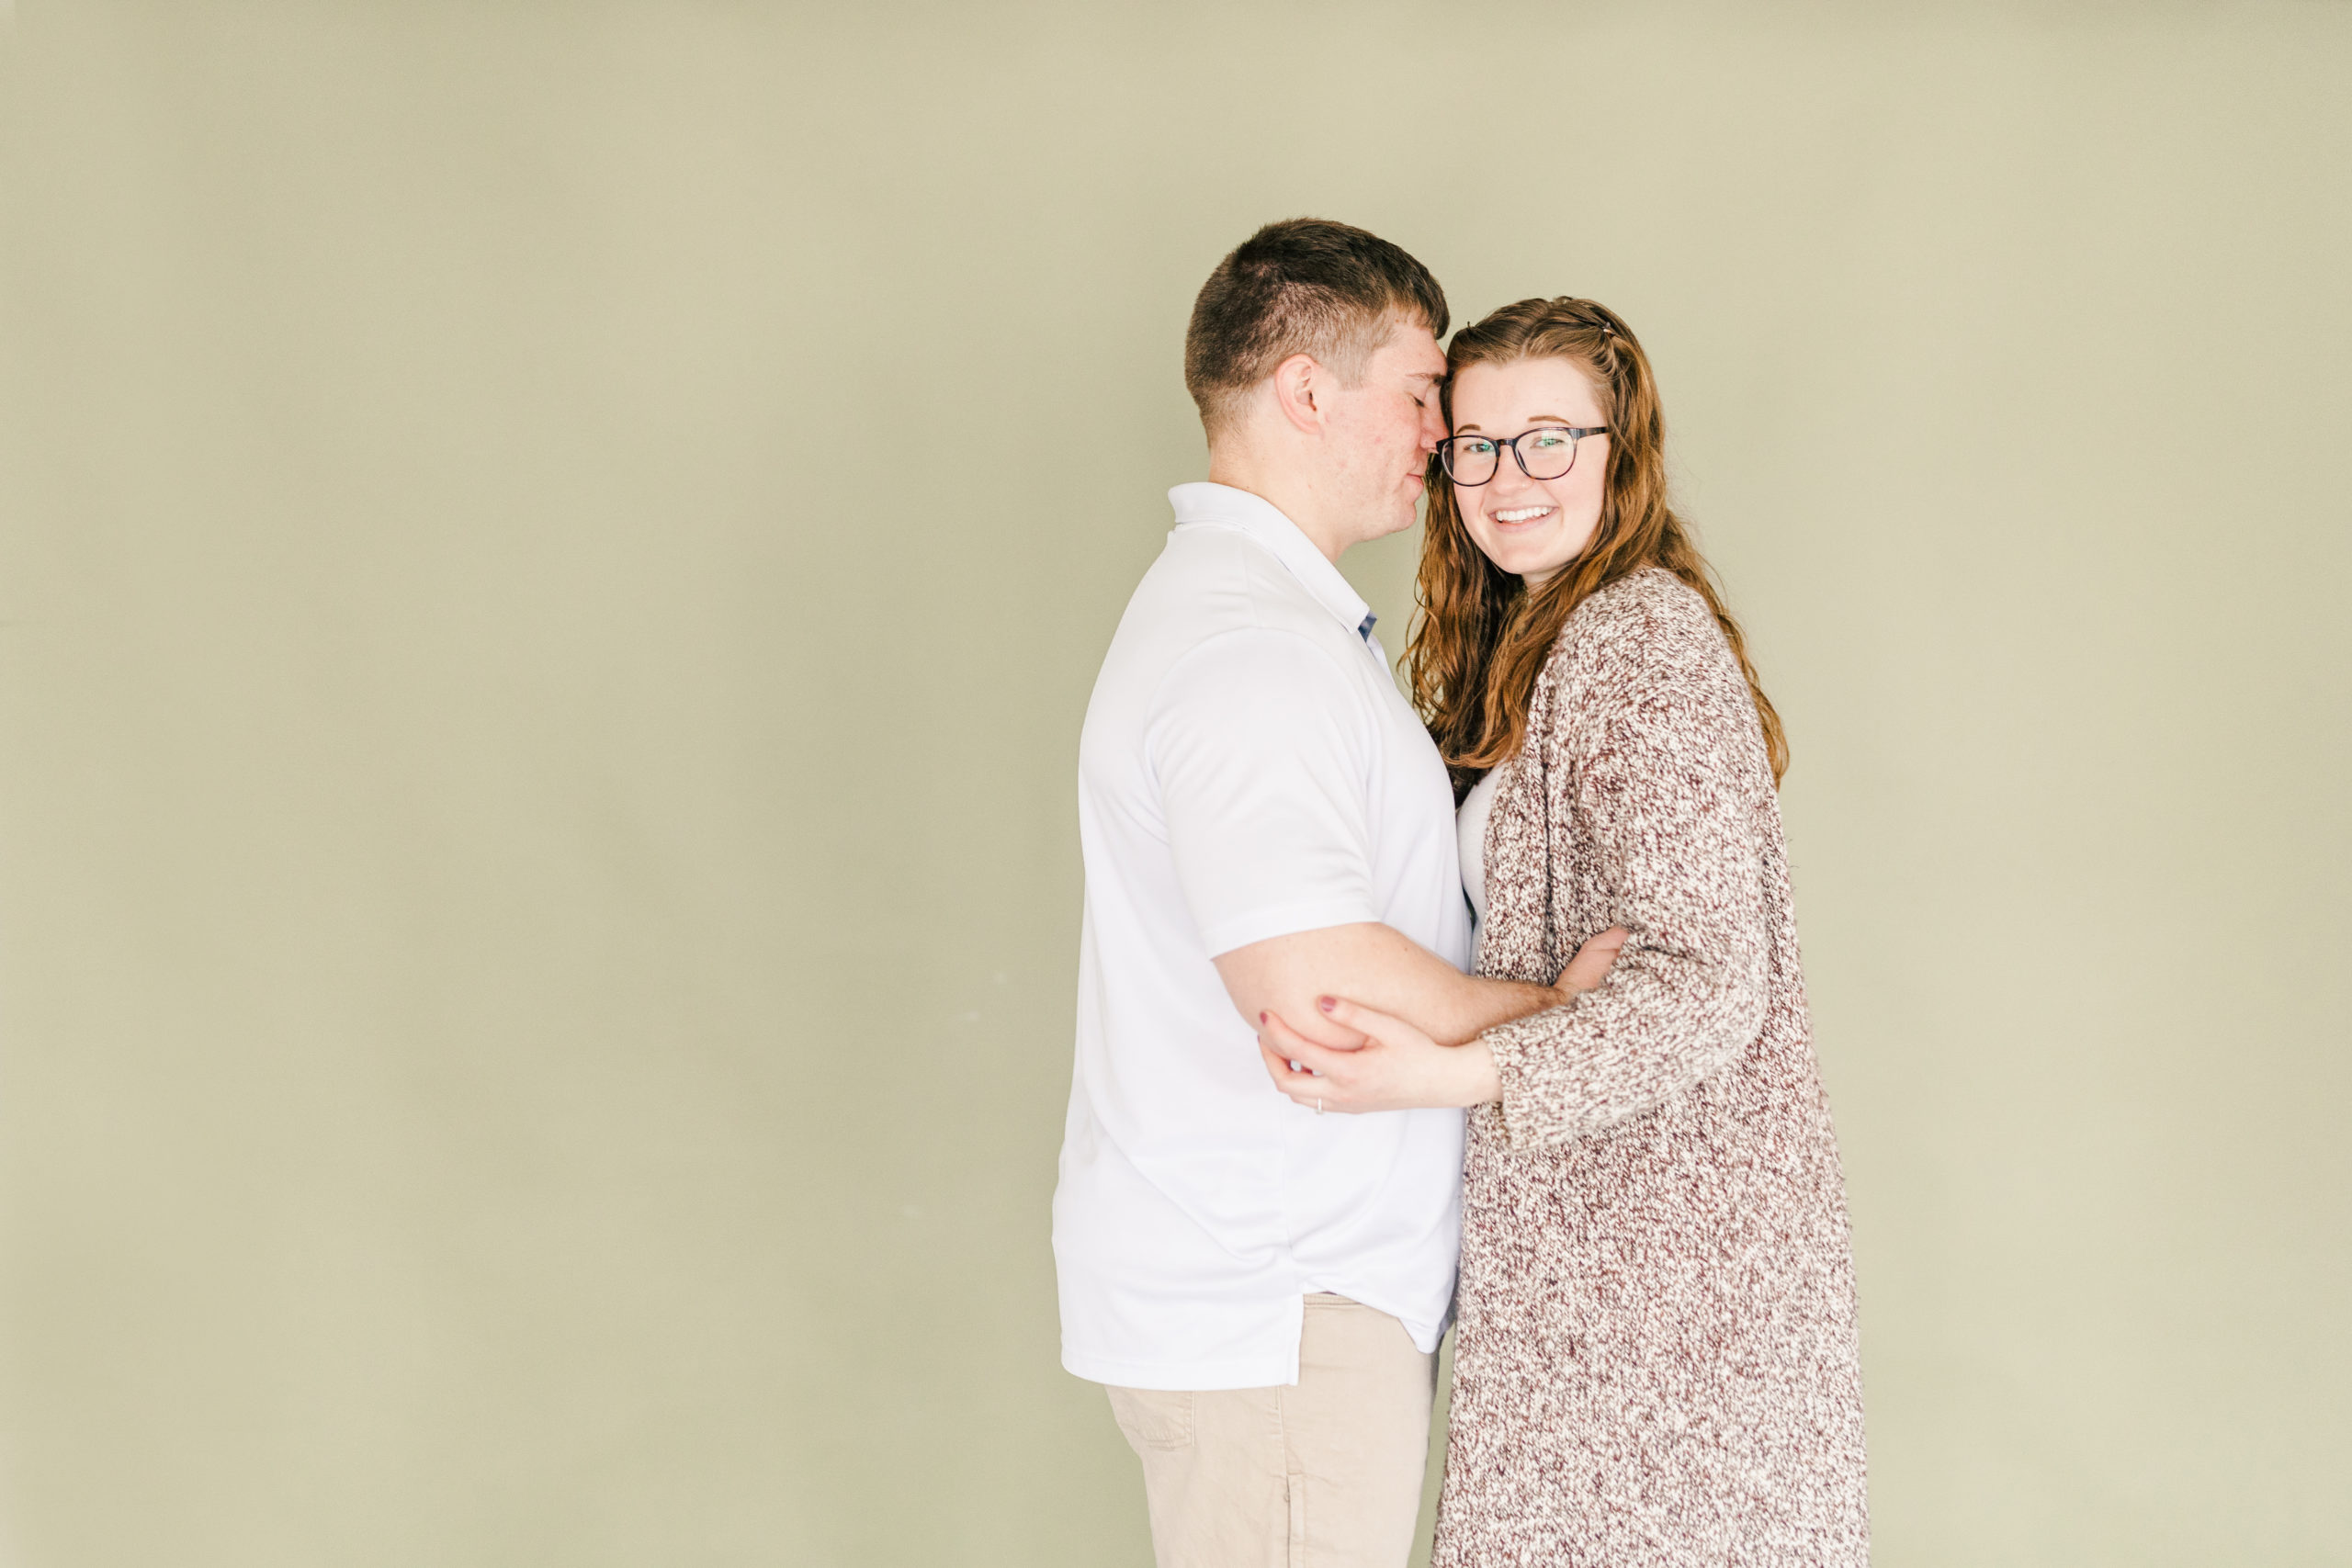 Studio session with engaged couple smiling